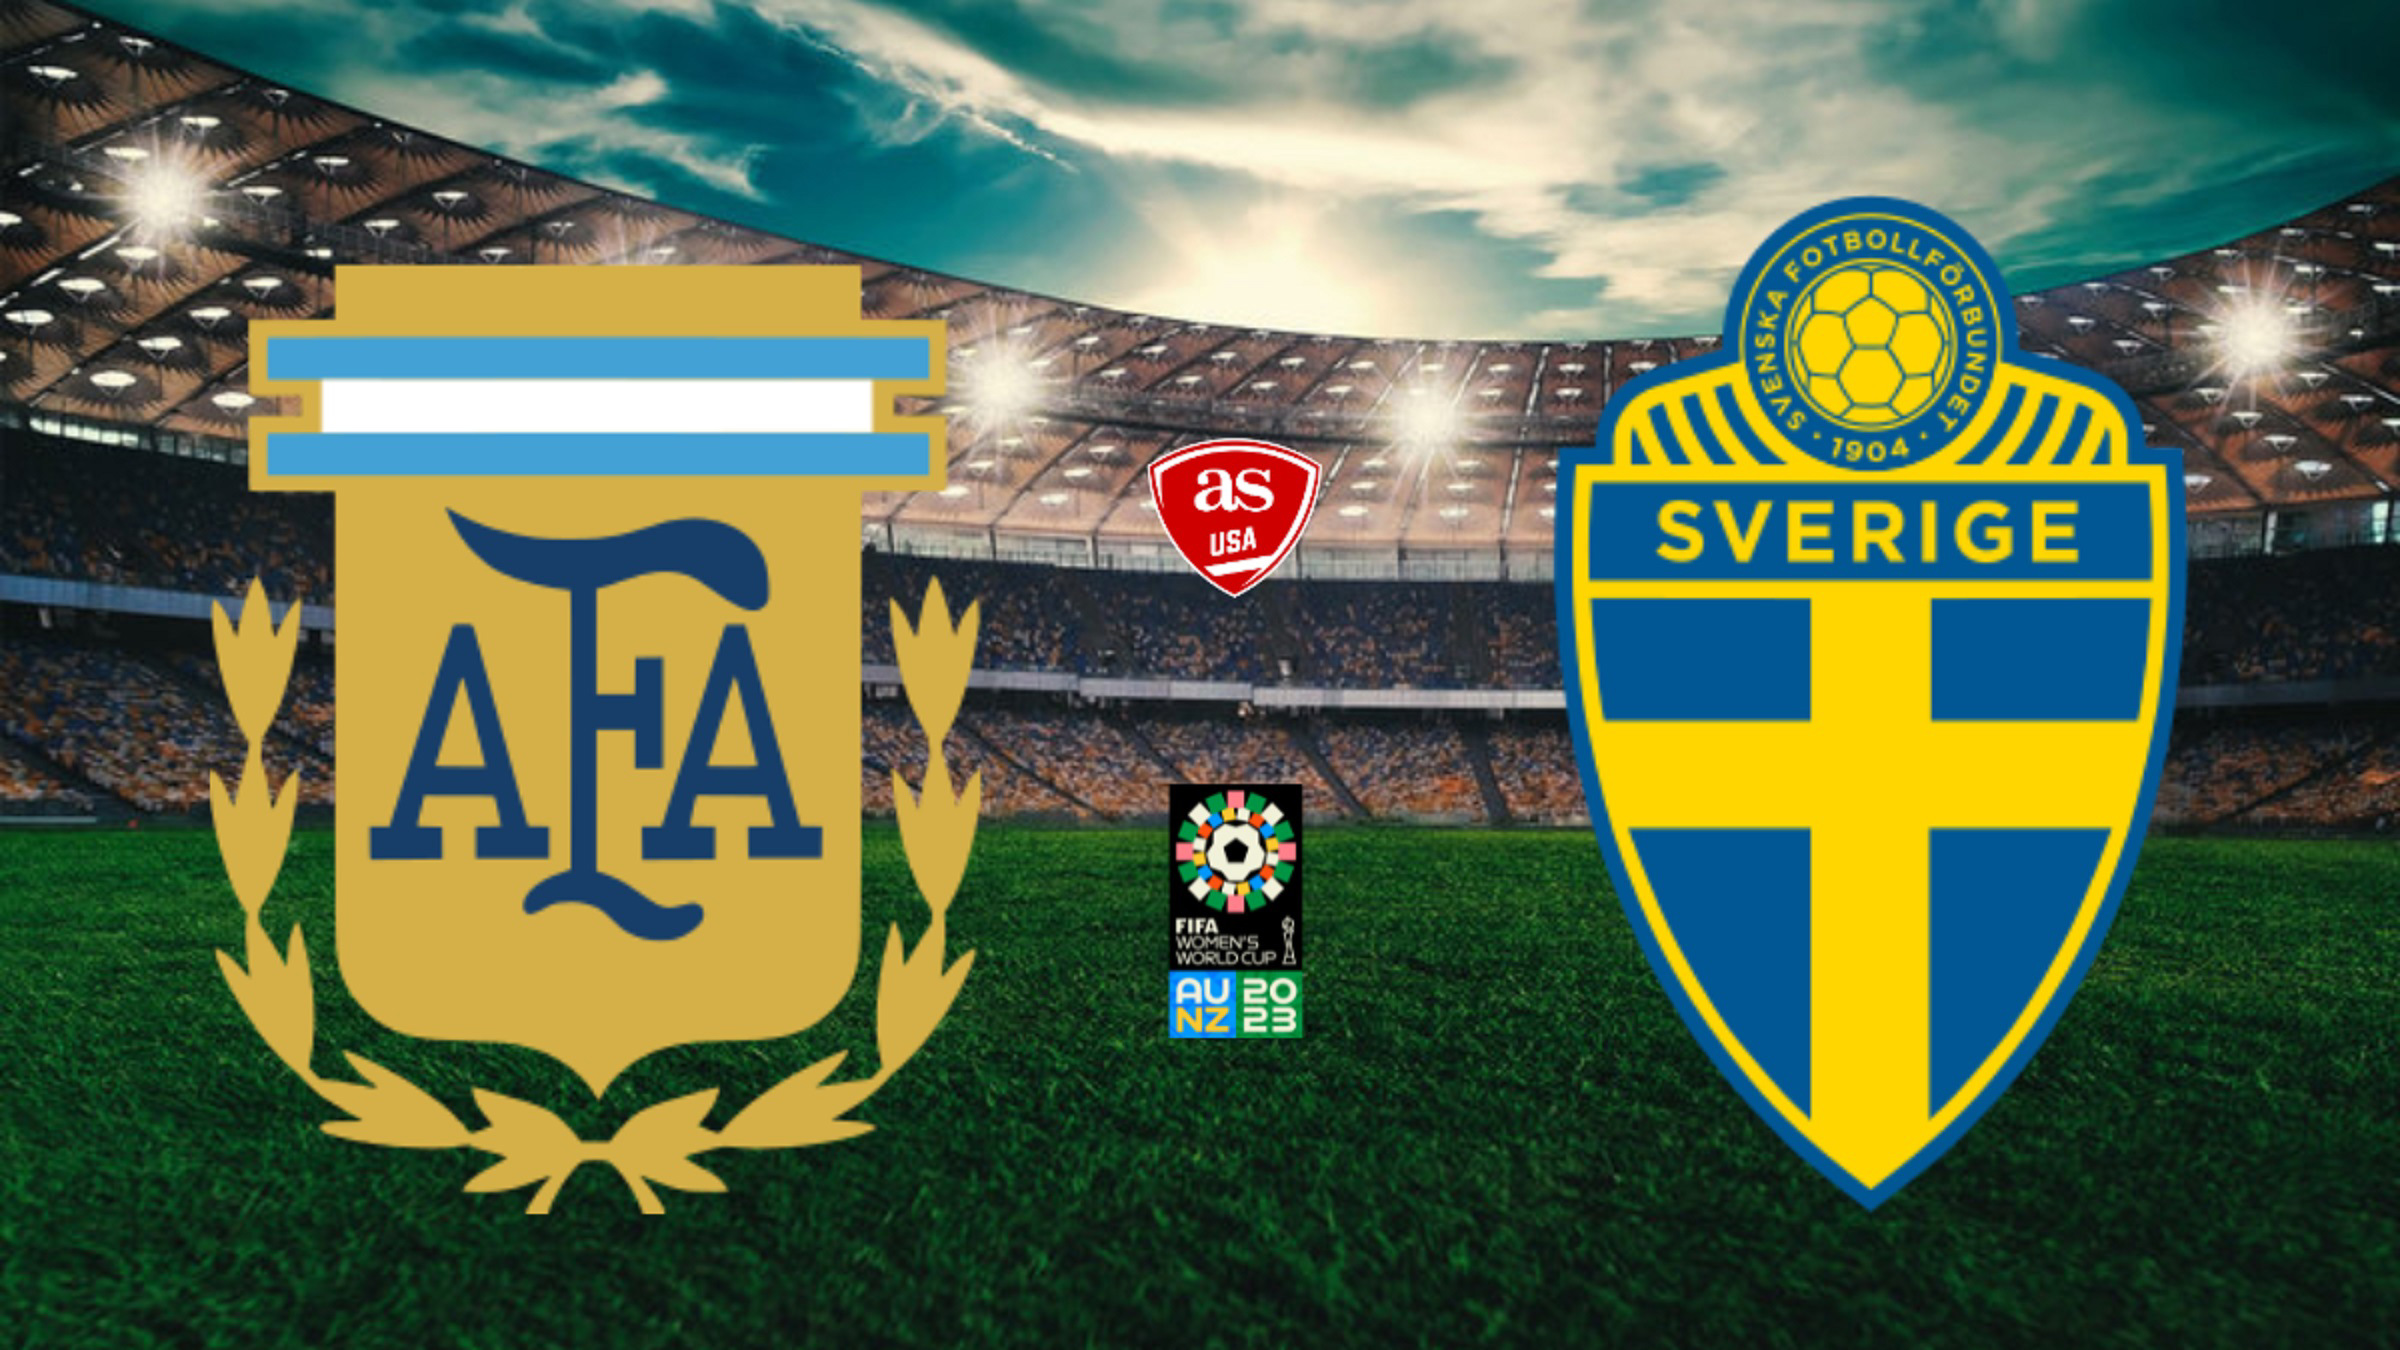 Argentina vs Sweden times, how to watch on TV, stream online Women’s